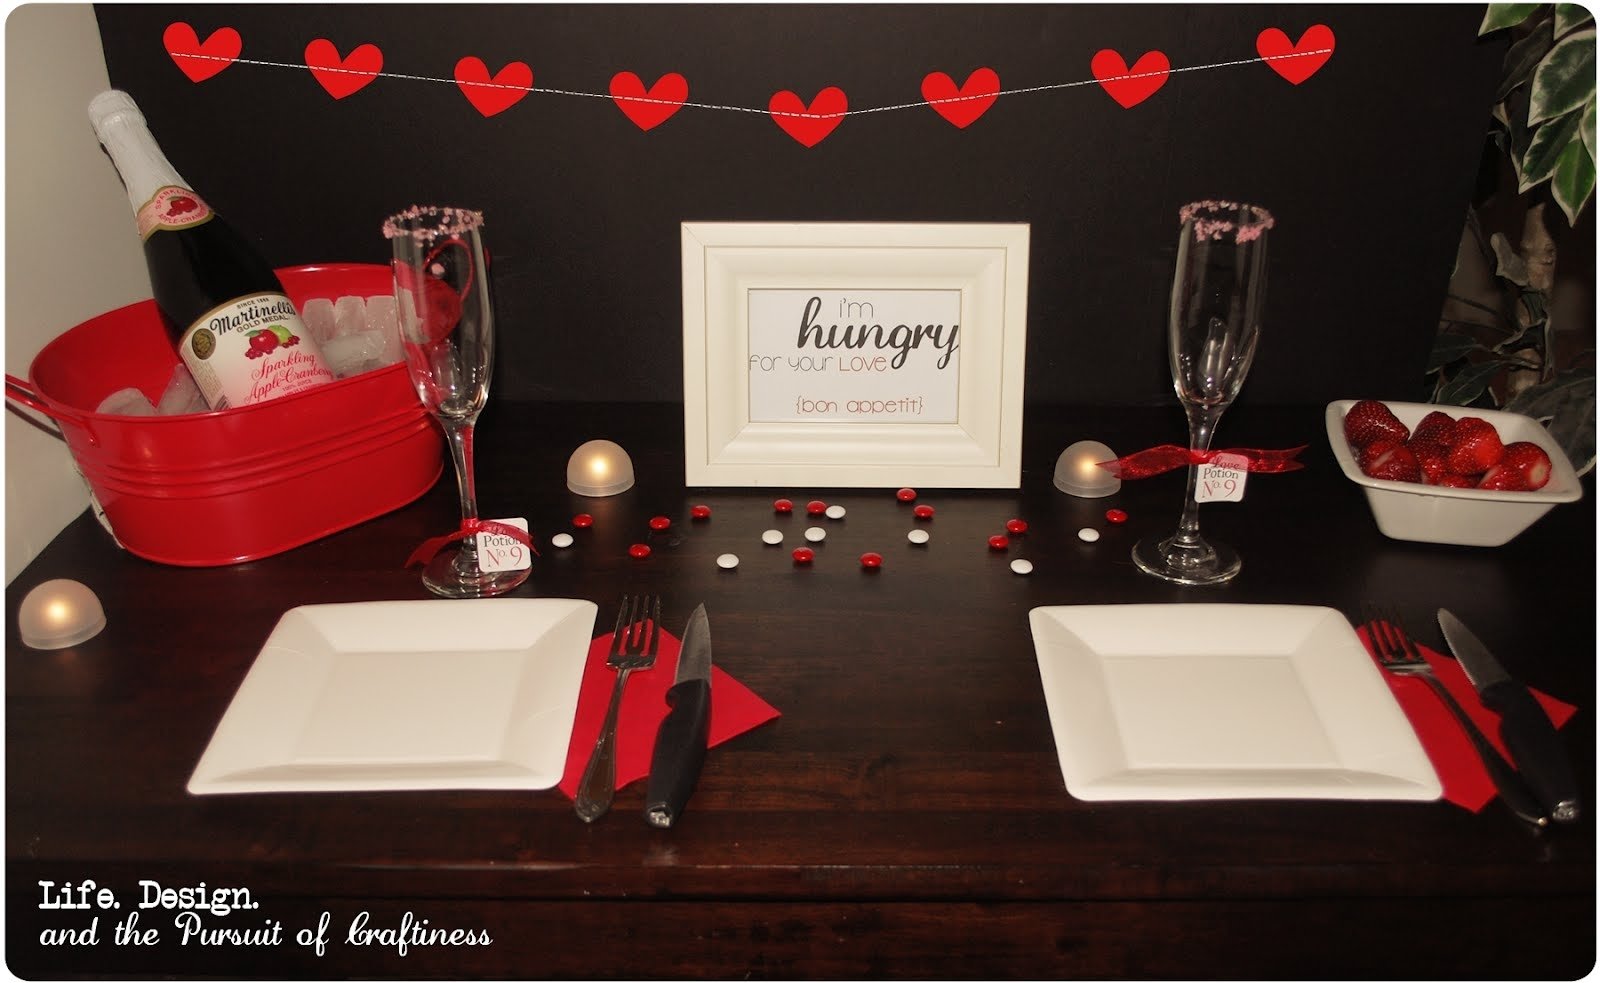 10 Gorgeous Romantic Dinner At Home Ideas life design and the pursuit of craftiness hungry for your love 2023